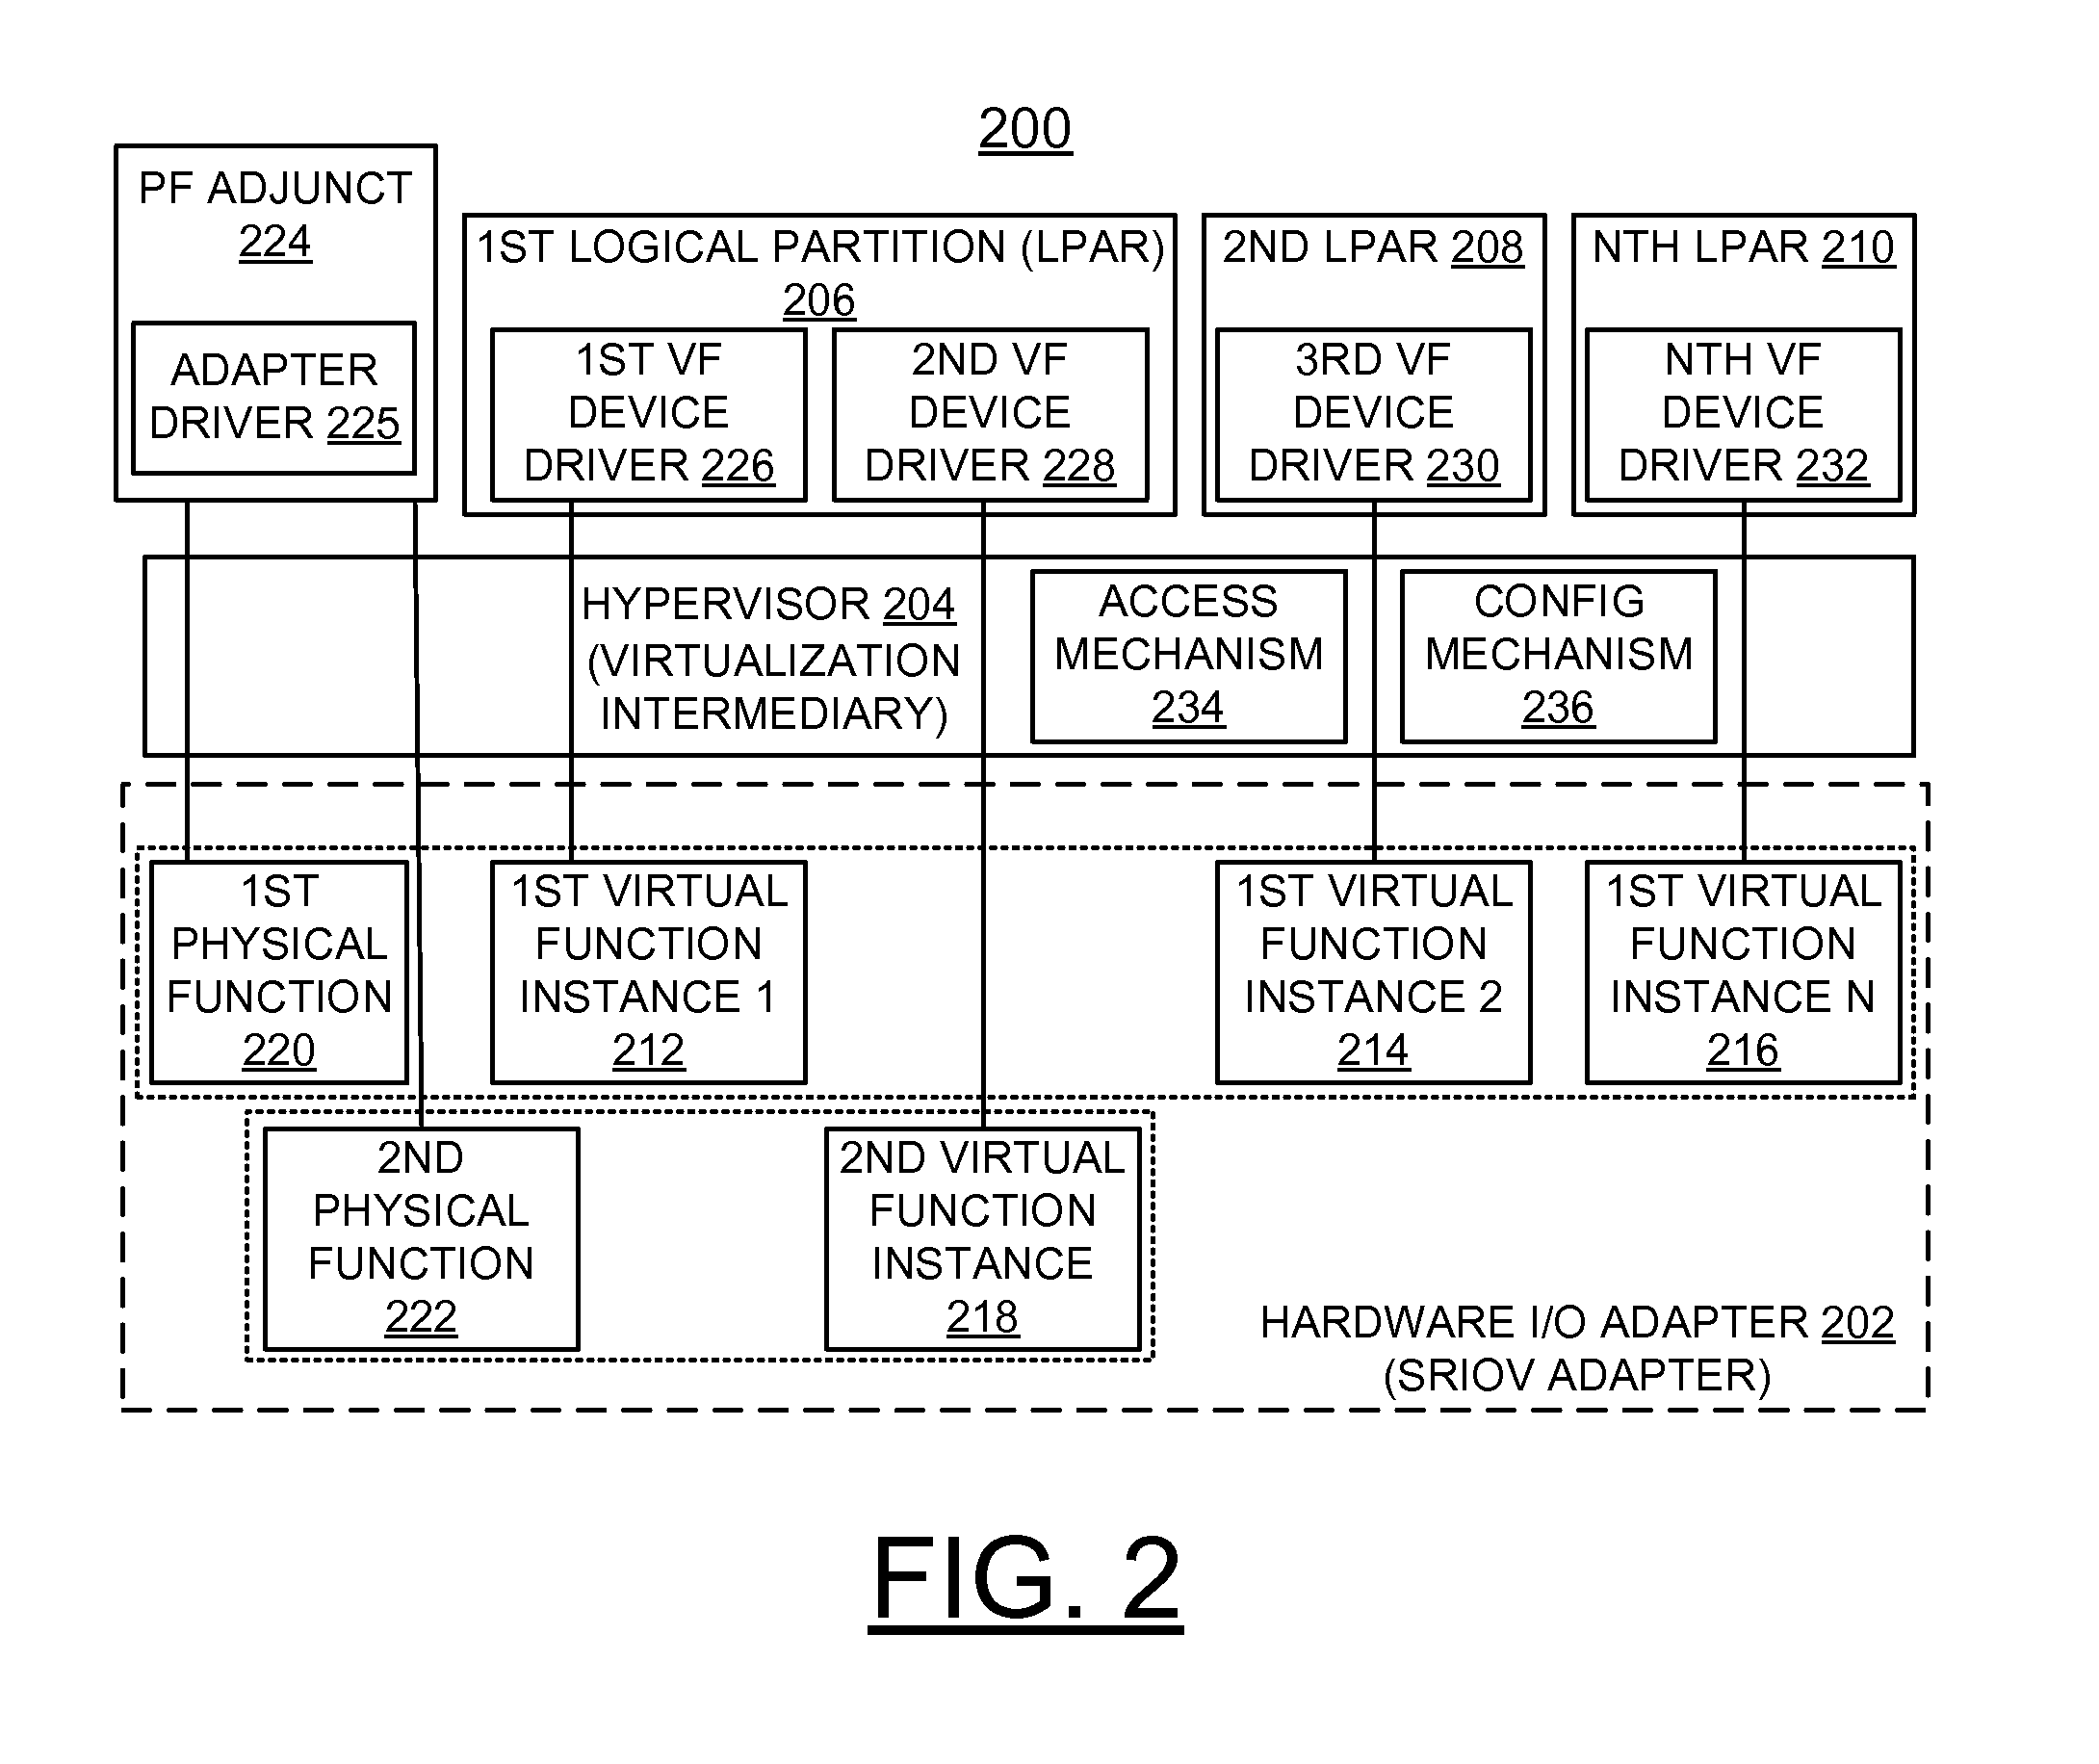 Implementing capacity and user-based resource allocation for a shared adapter in a virtualized system